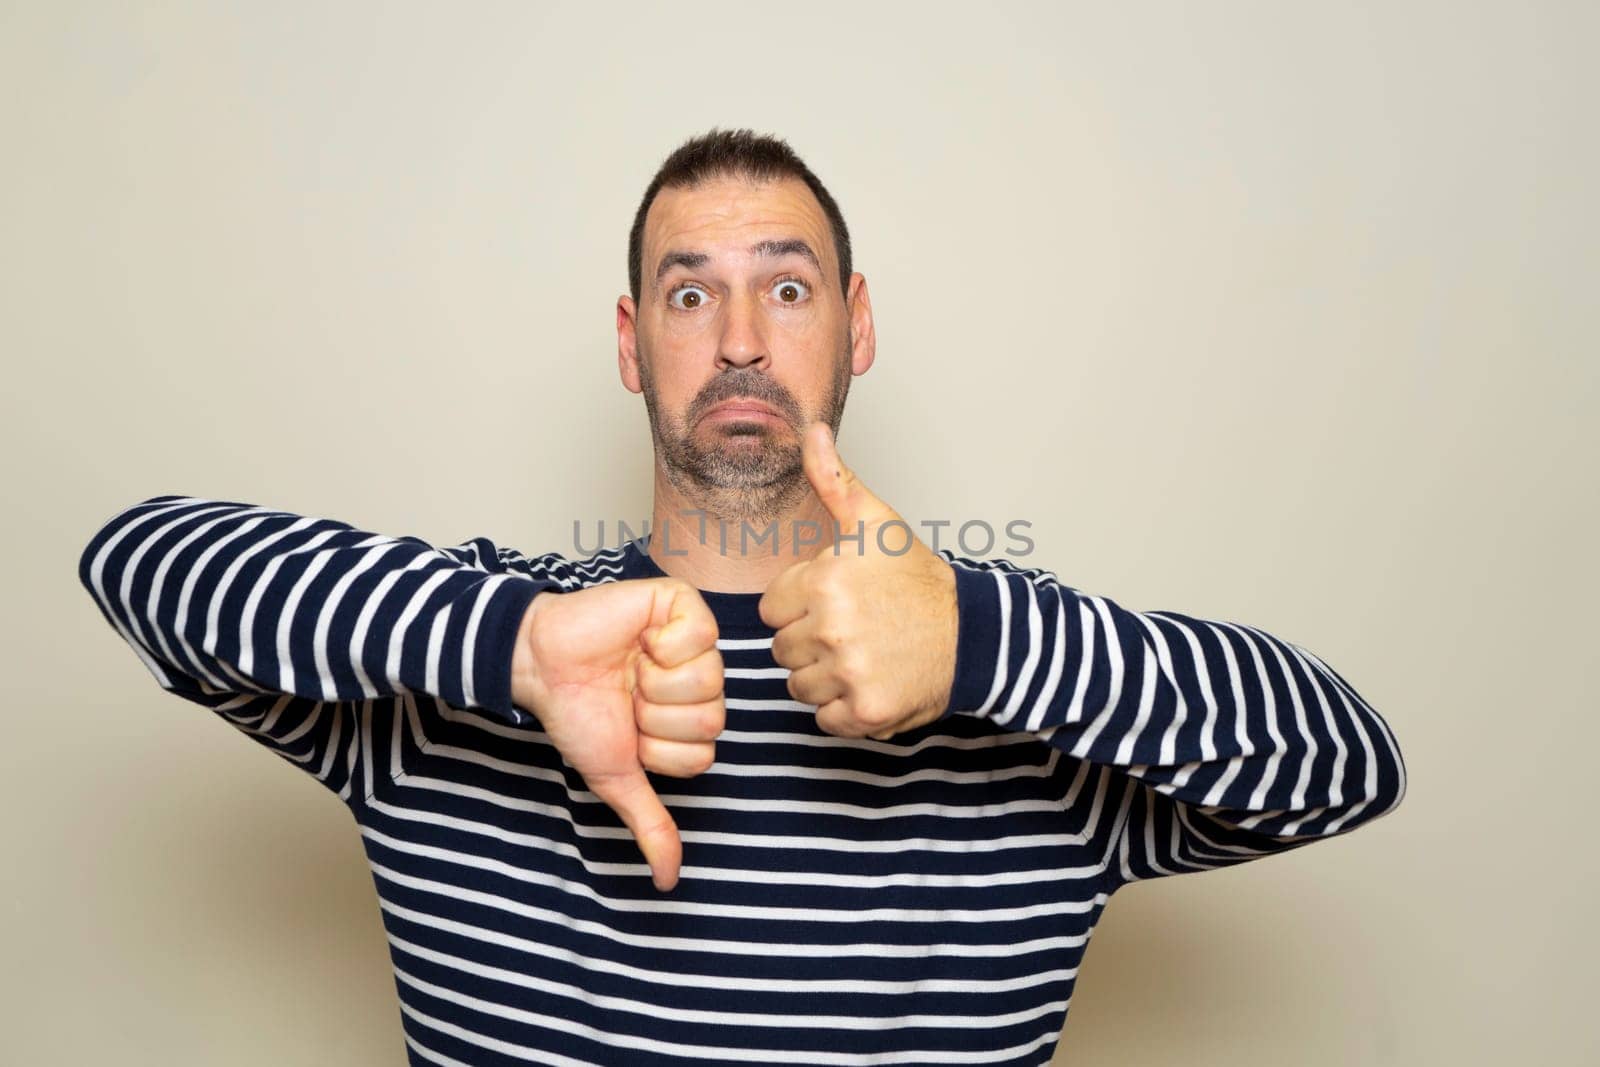 Bearded Hispanic man in his 40s wearing a striped sweater giving a thumbs up and down in doubt and indecision concept, isolated over beige background by Barriolo82